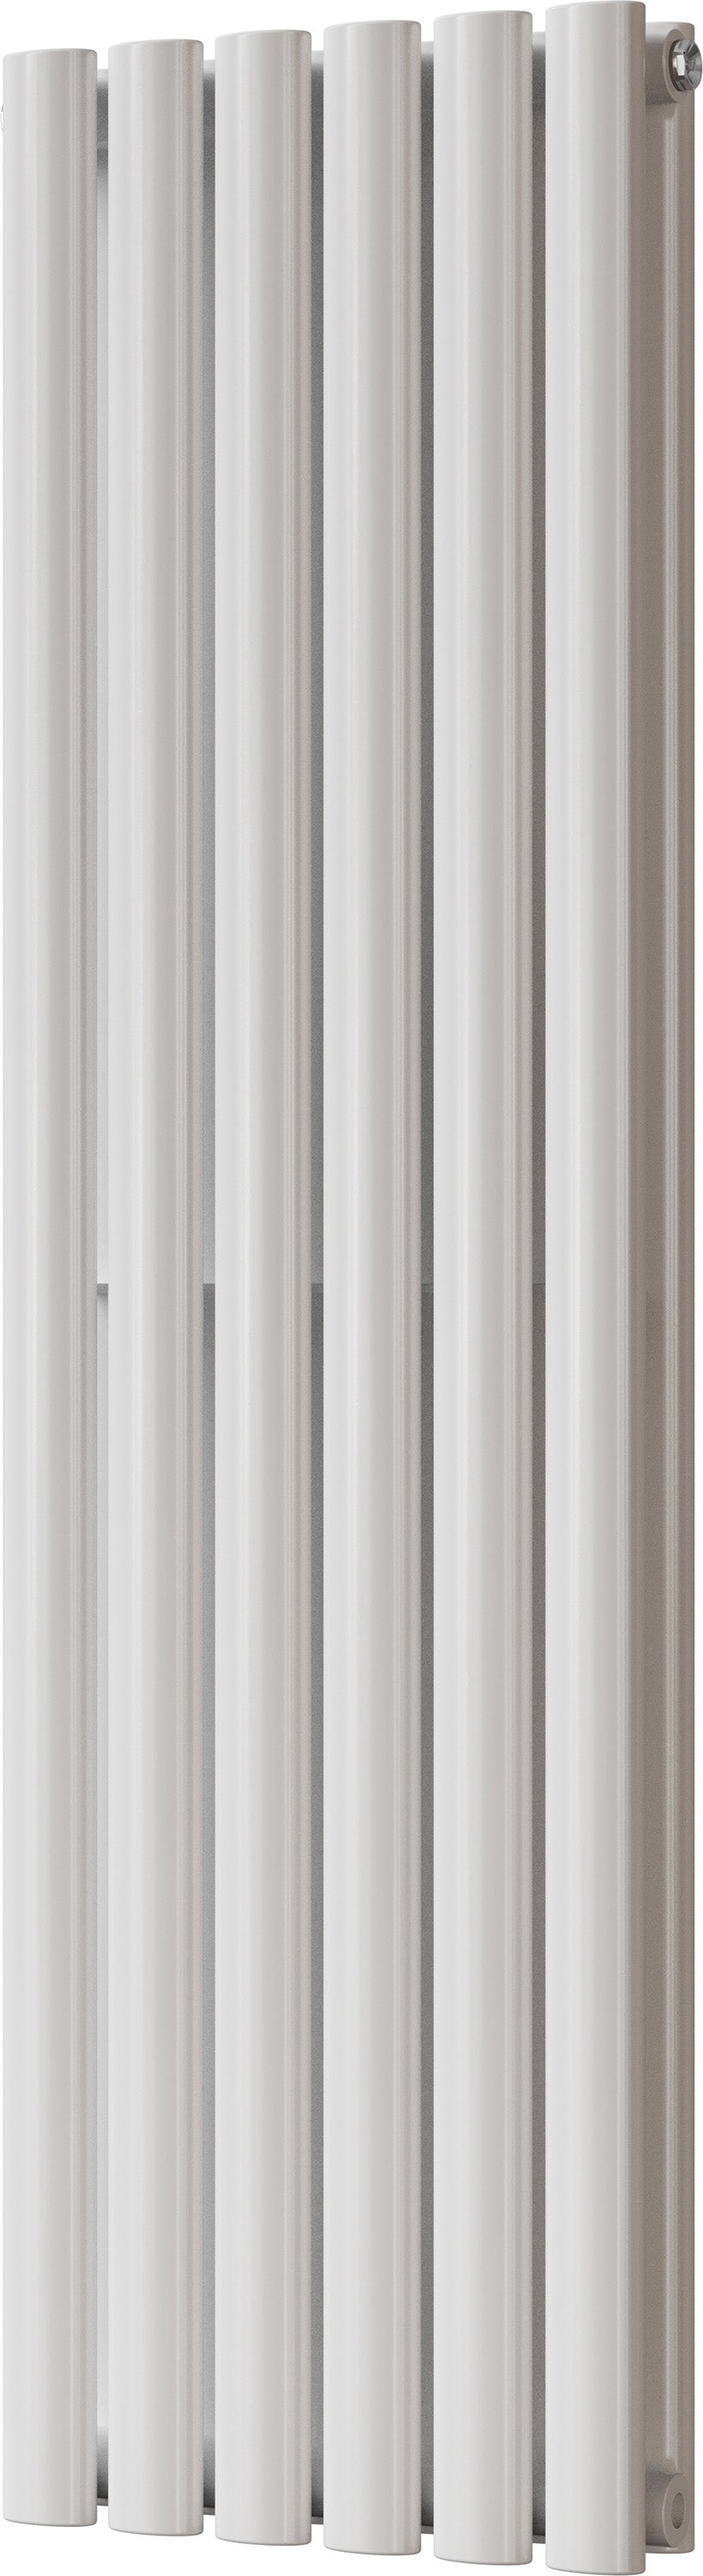 Omeara - White Vertical Radiator H1200mm x W348mm Double Panel